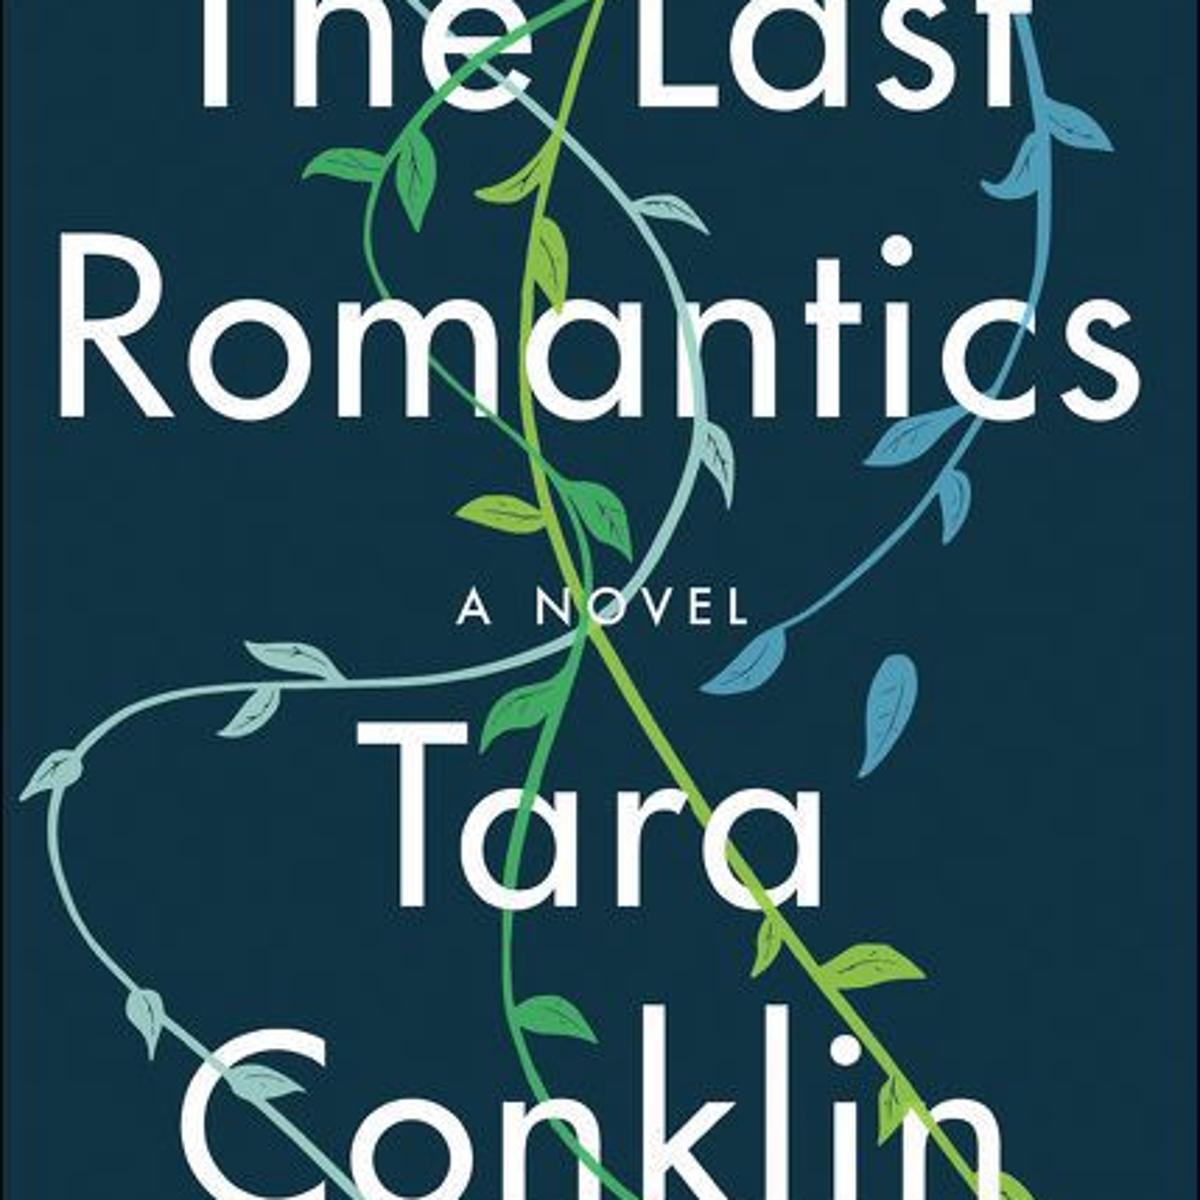 Get Book The last romantics discussion questions Free